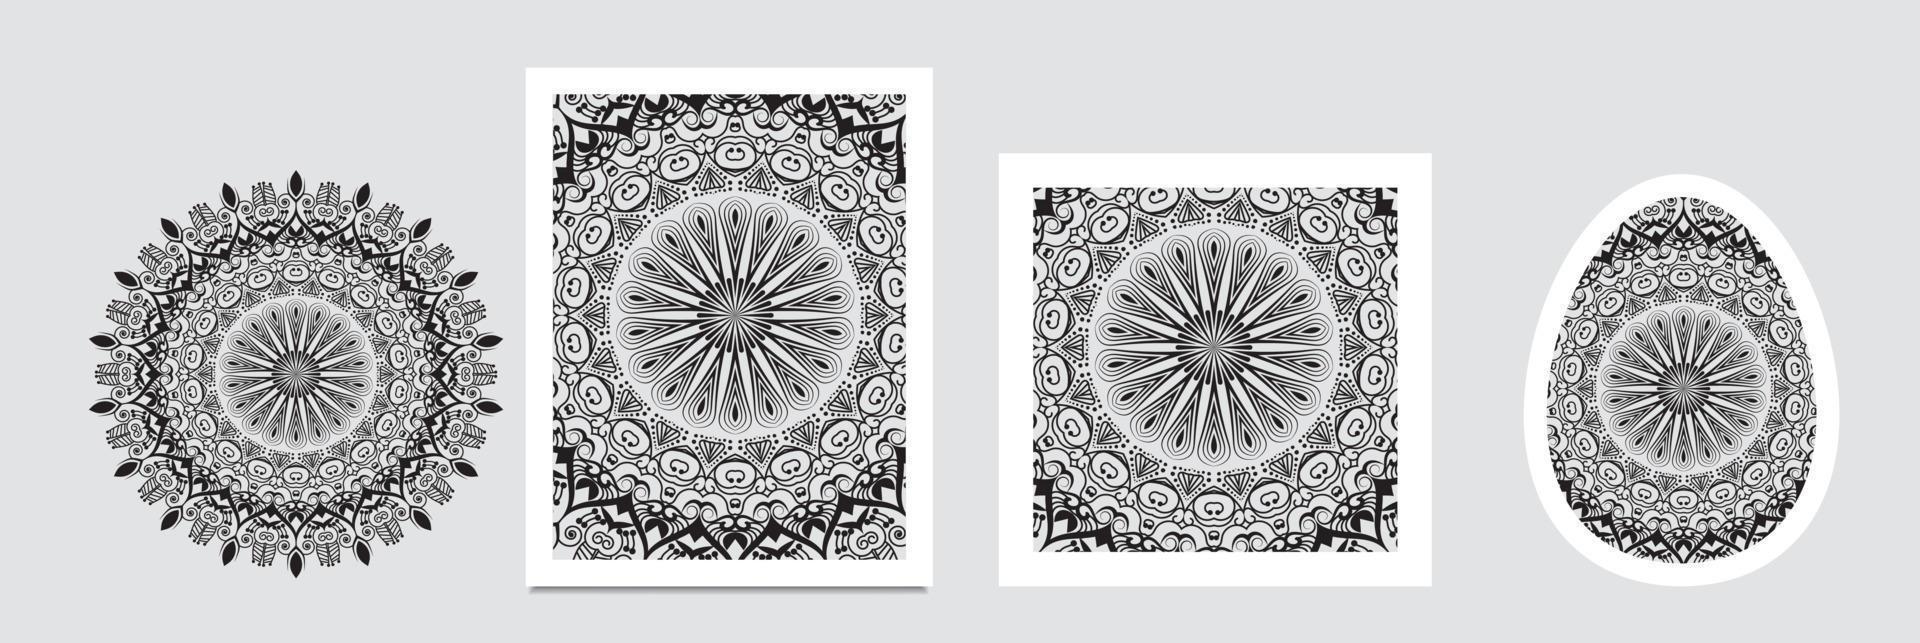 Mandala background. Vintage pattern with round ornament, decorative indian medallion, abstract flower element vector